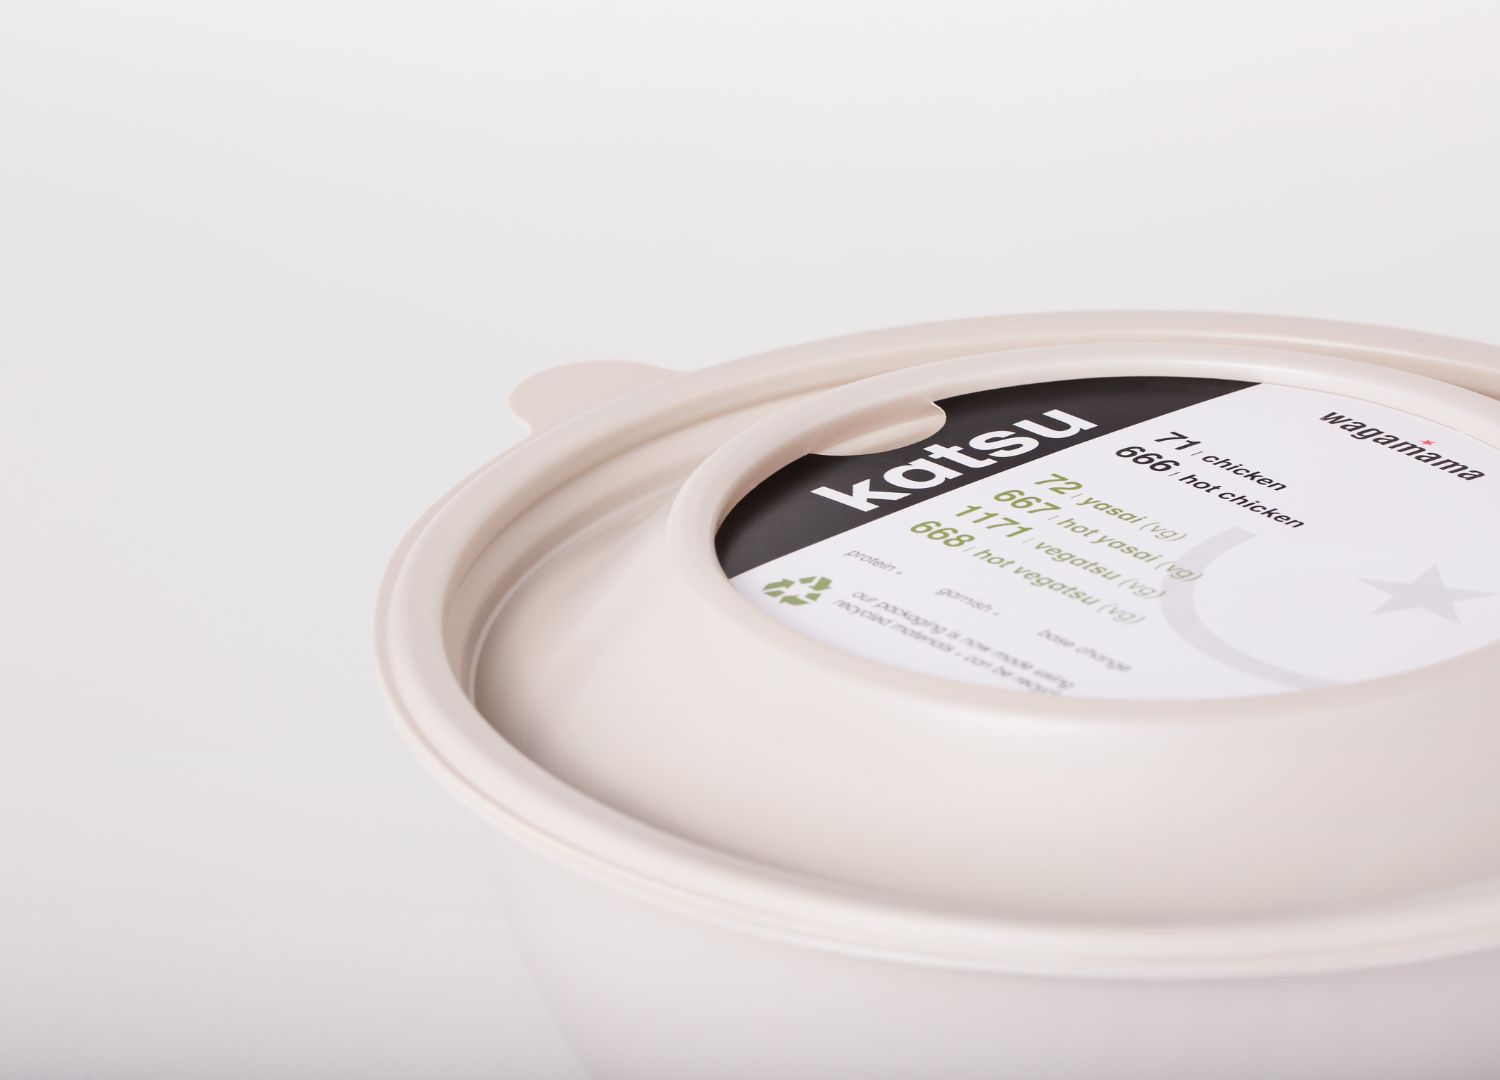 Sustainable packaging range by Morrama